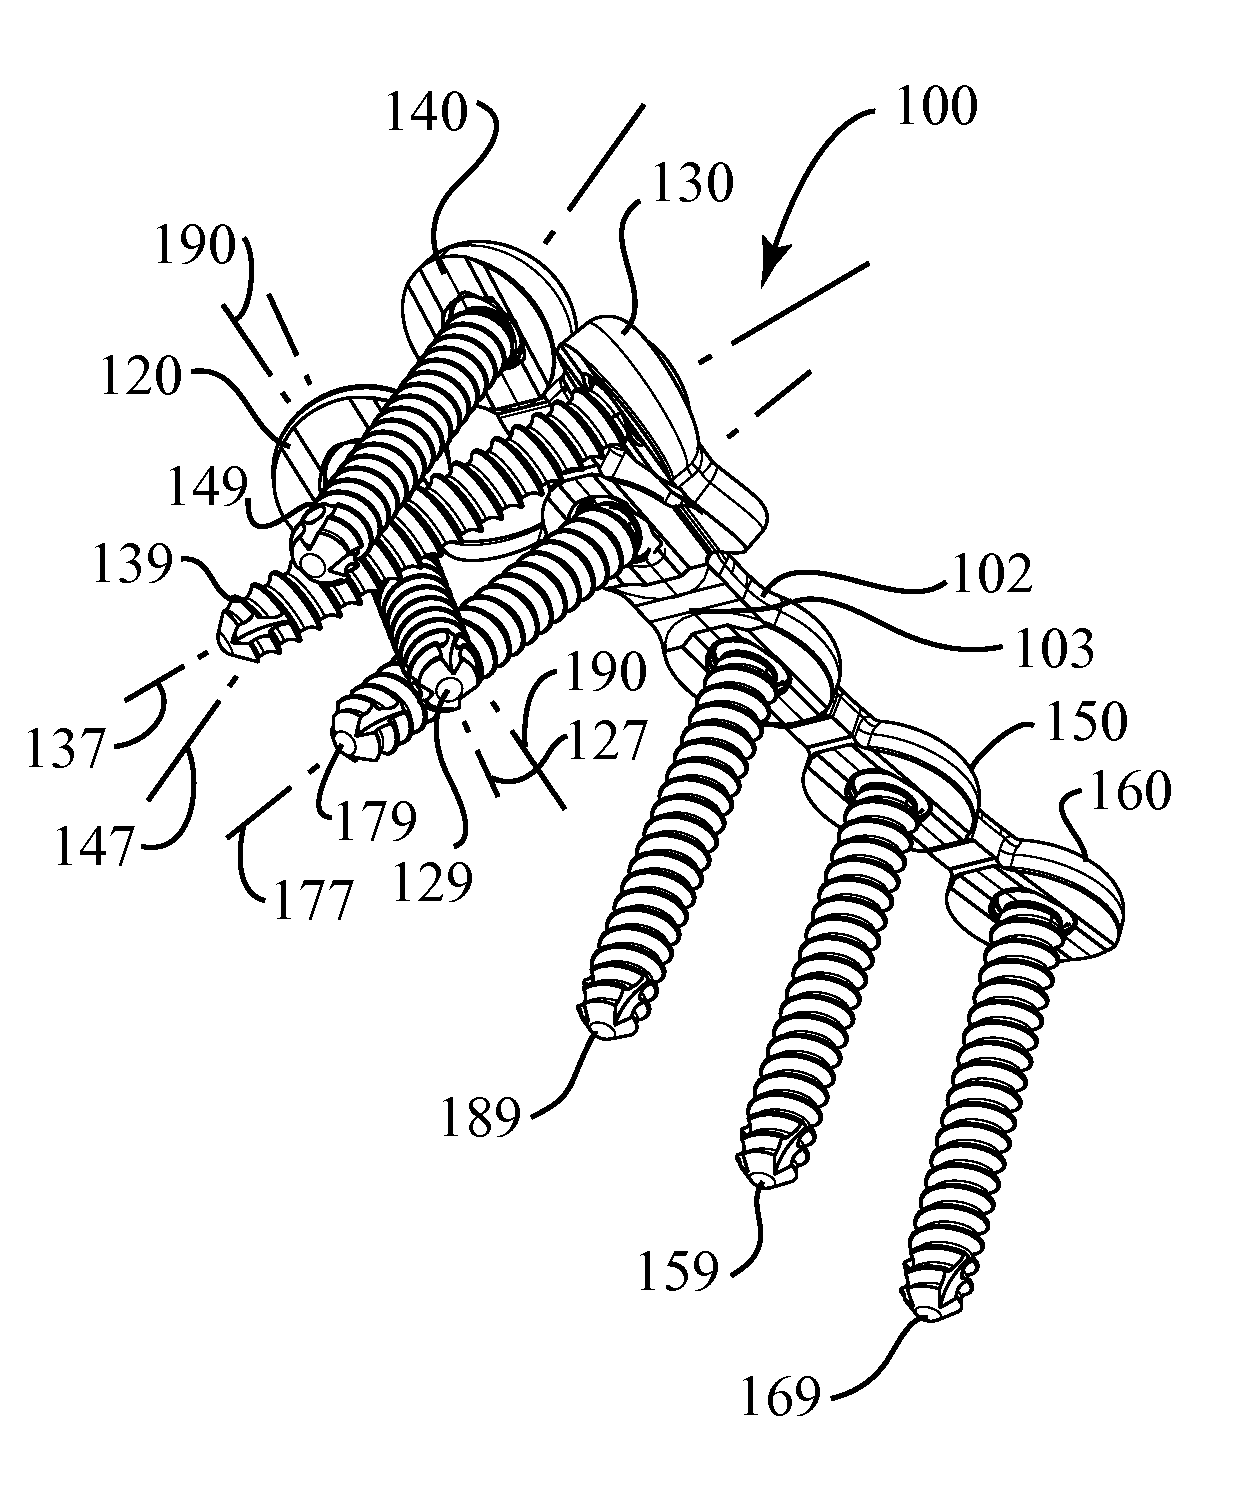 Elbow Fracture Fixation System